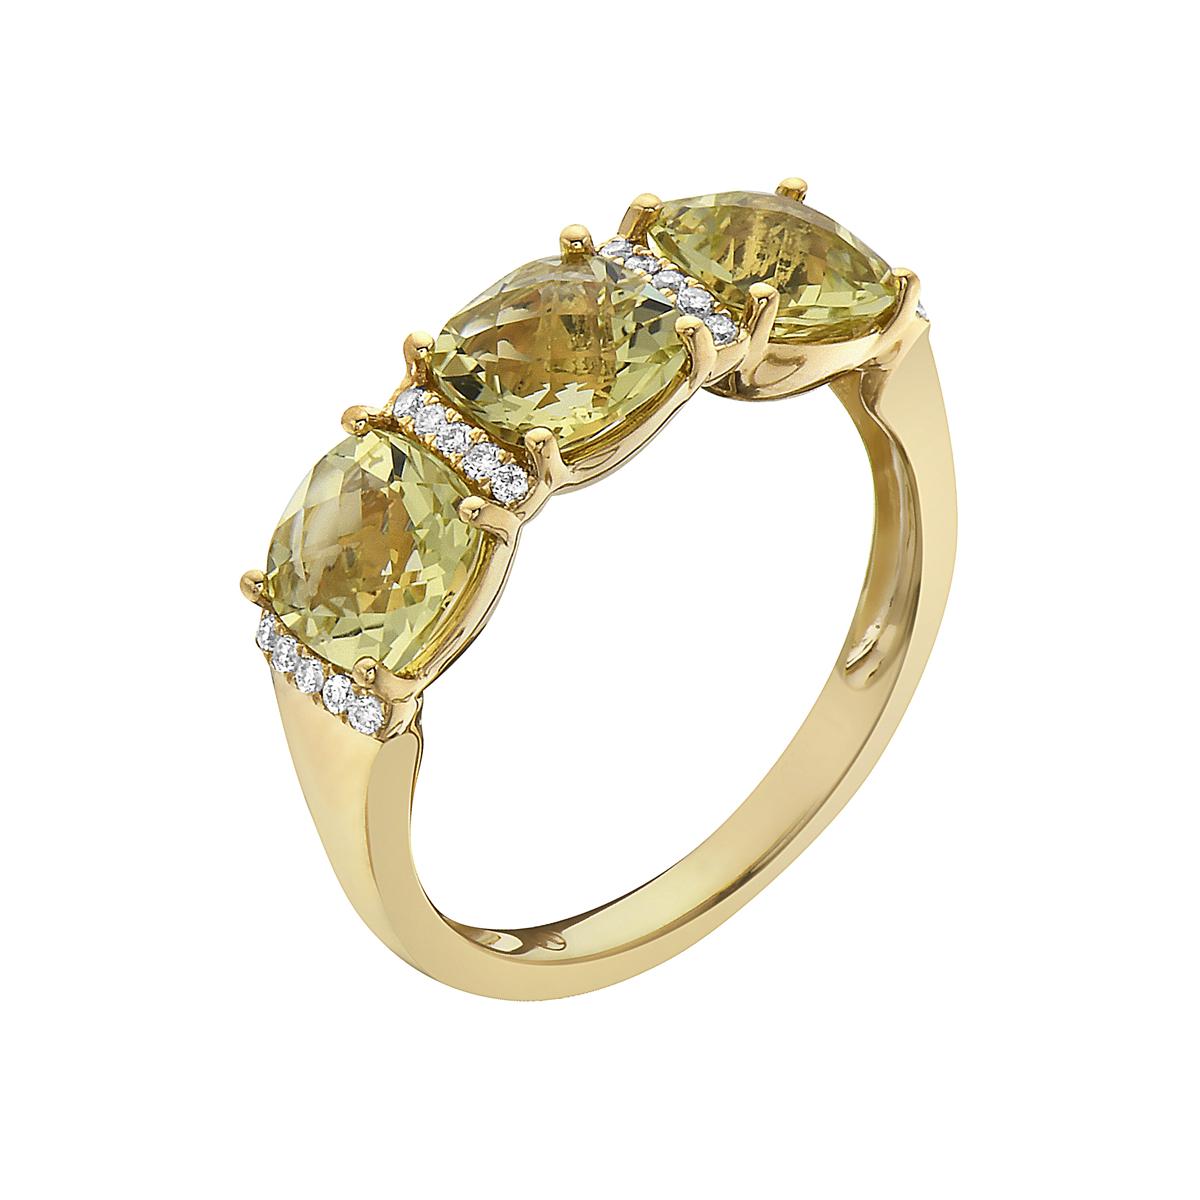 With this exquisite semi-precious gold-green quartz ring, style and glamour are in the spotlight. This 14-karat cushion cut ring is made from 3.3 grams of gold, 3 green quartz totaling 2.33 karats, and is surrounded by 20 round SI1-SI2, GH color